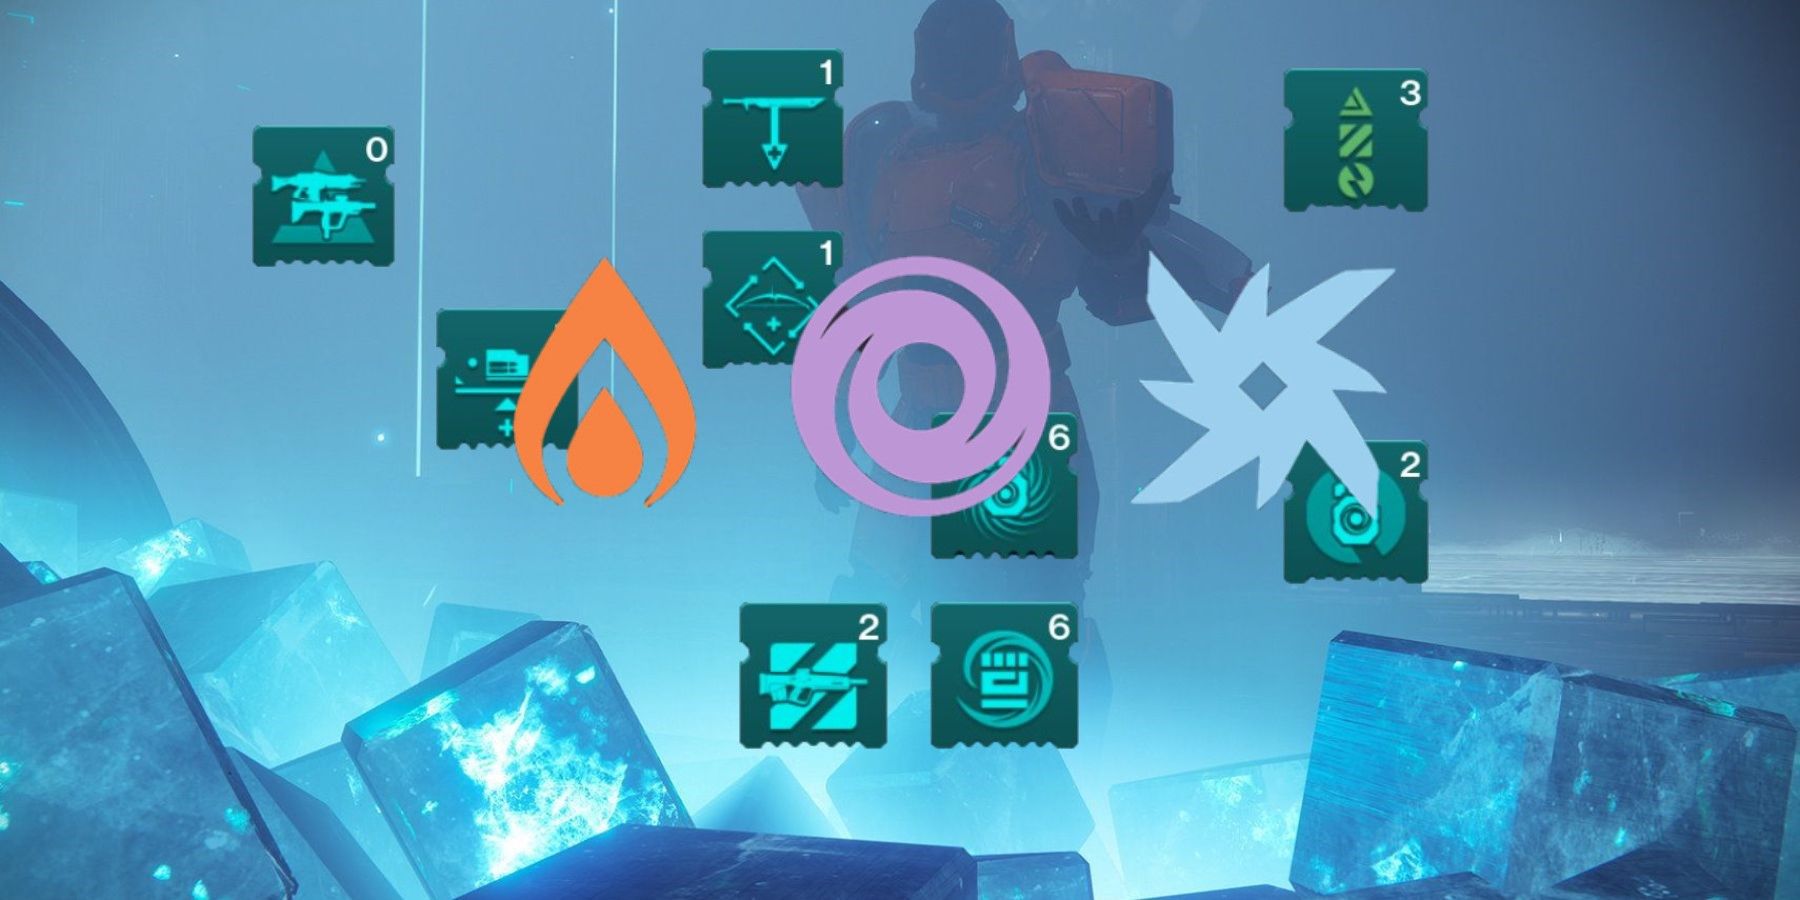 destiny 2 twab 30th anniversary pack no glimmer cost slotting mods free instant changes allows third-party apps to change mods shaders items fully